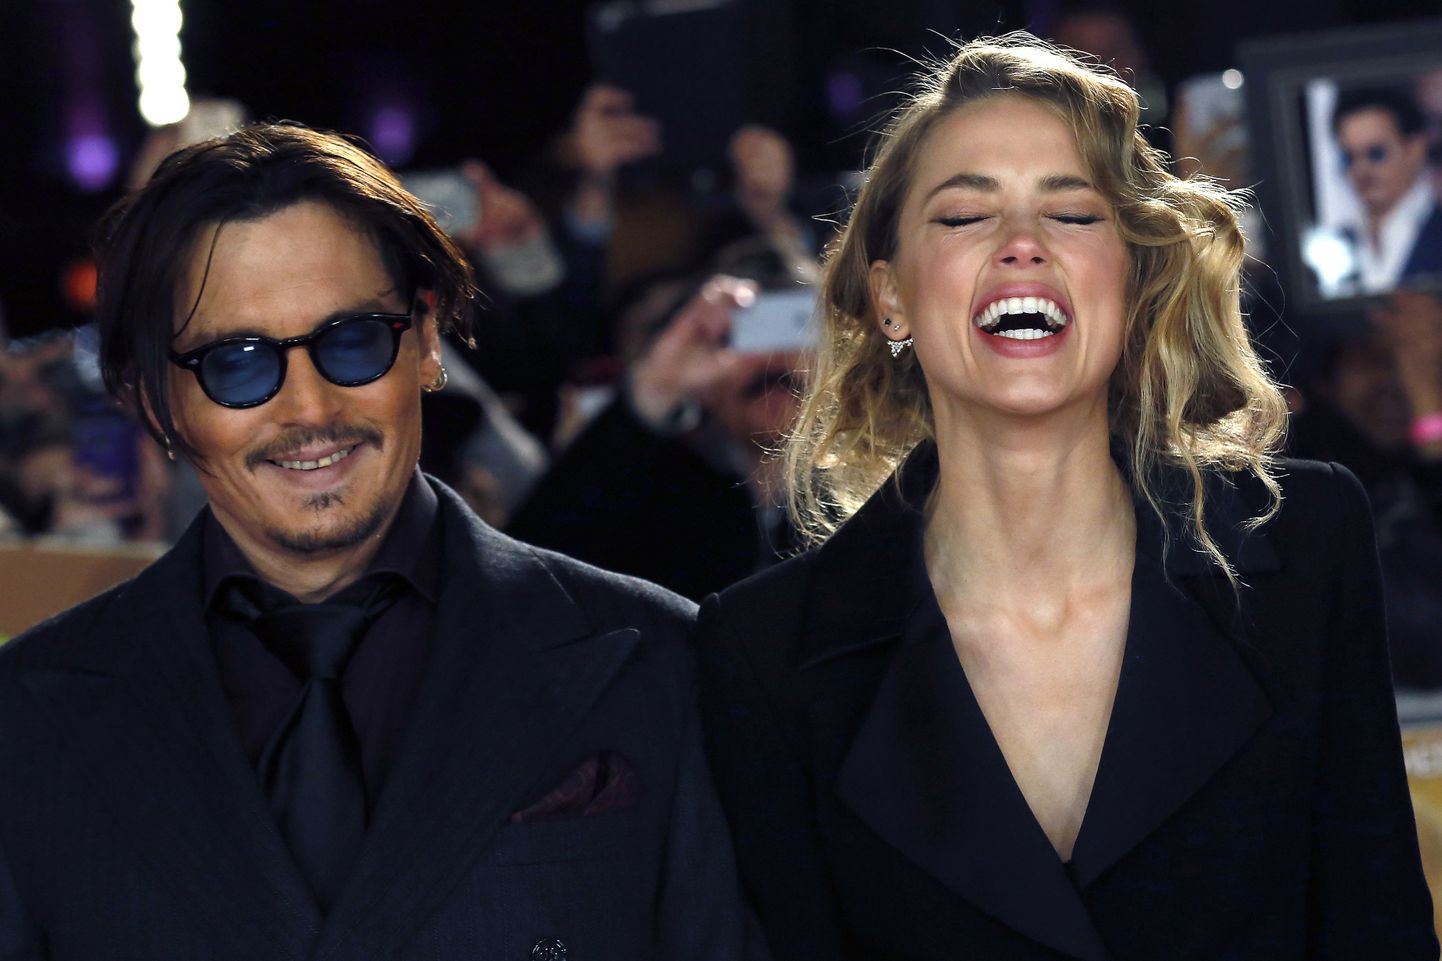 Actor Johnny Depp and girlfriend Amber Heard laugh as they arrive for the UK premiere of "Mortdecai" at Leicester Sqaure in London, in this file photo taken January 19, 2015.  Depp, the star of the "Pirates of the Caribbean" film series, married his fiancee, Amber Heard, at their home in Los Angeles earlier this week, according to People magazine.  REUTERS/Luke MacGregor/Files   (BRITAIN - Tags: ENTERTAINMENT)